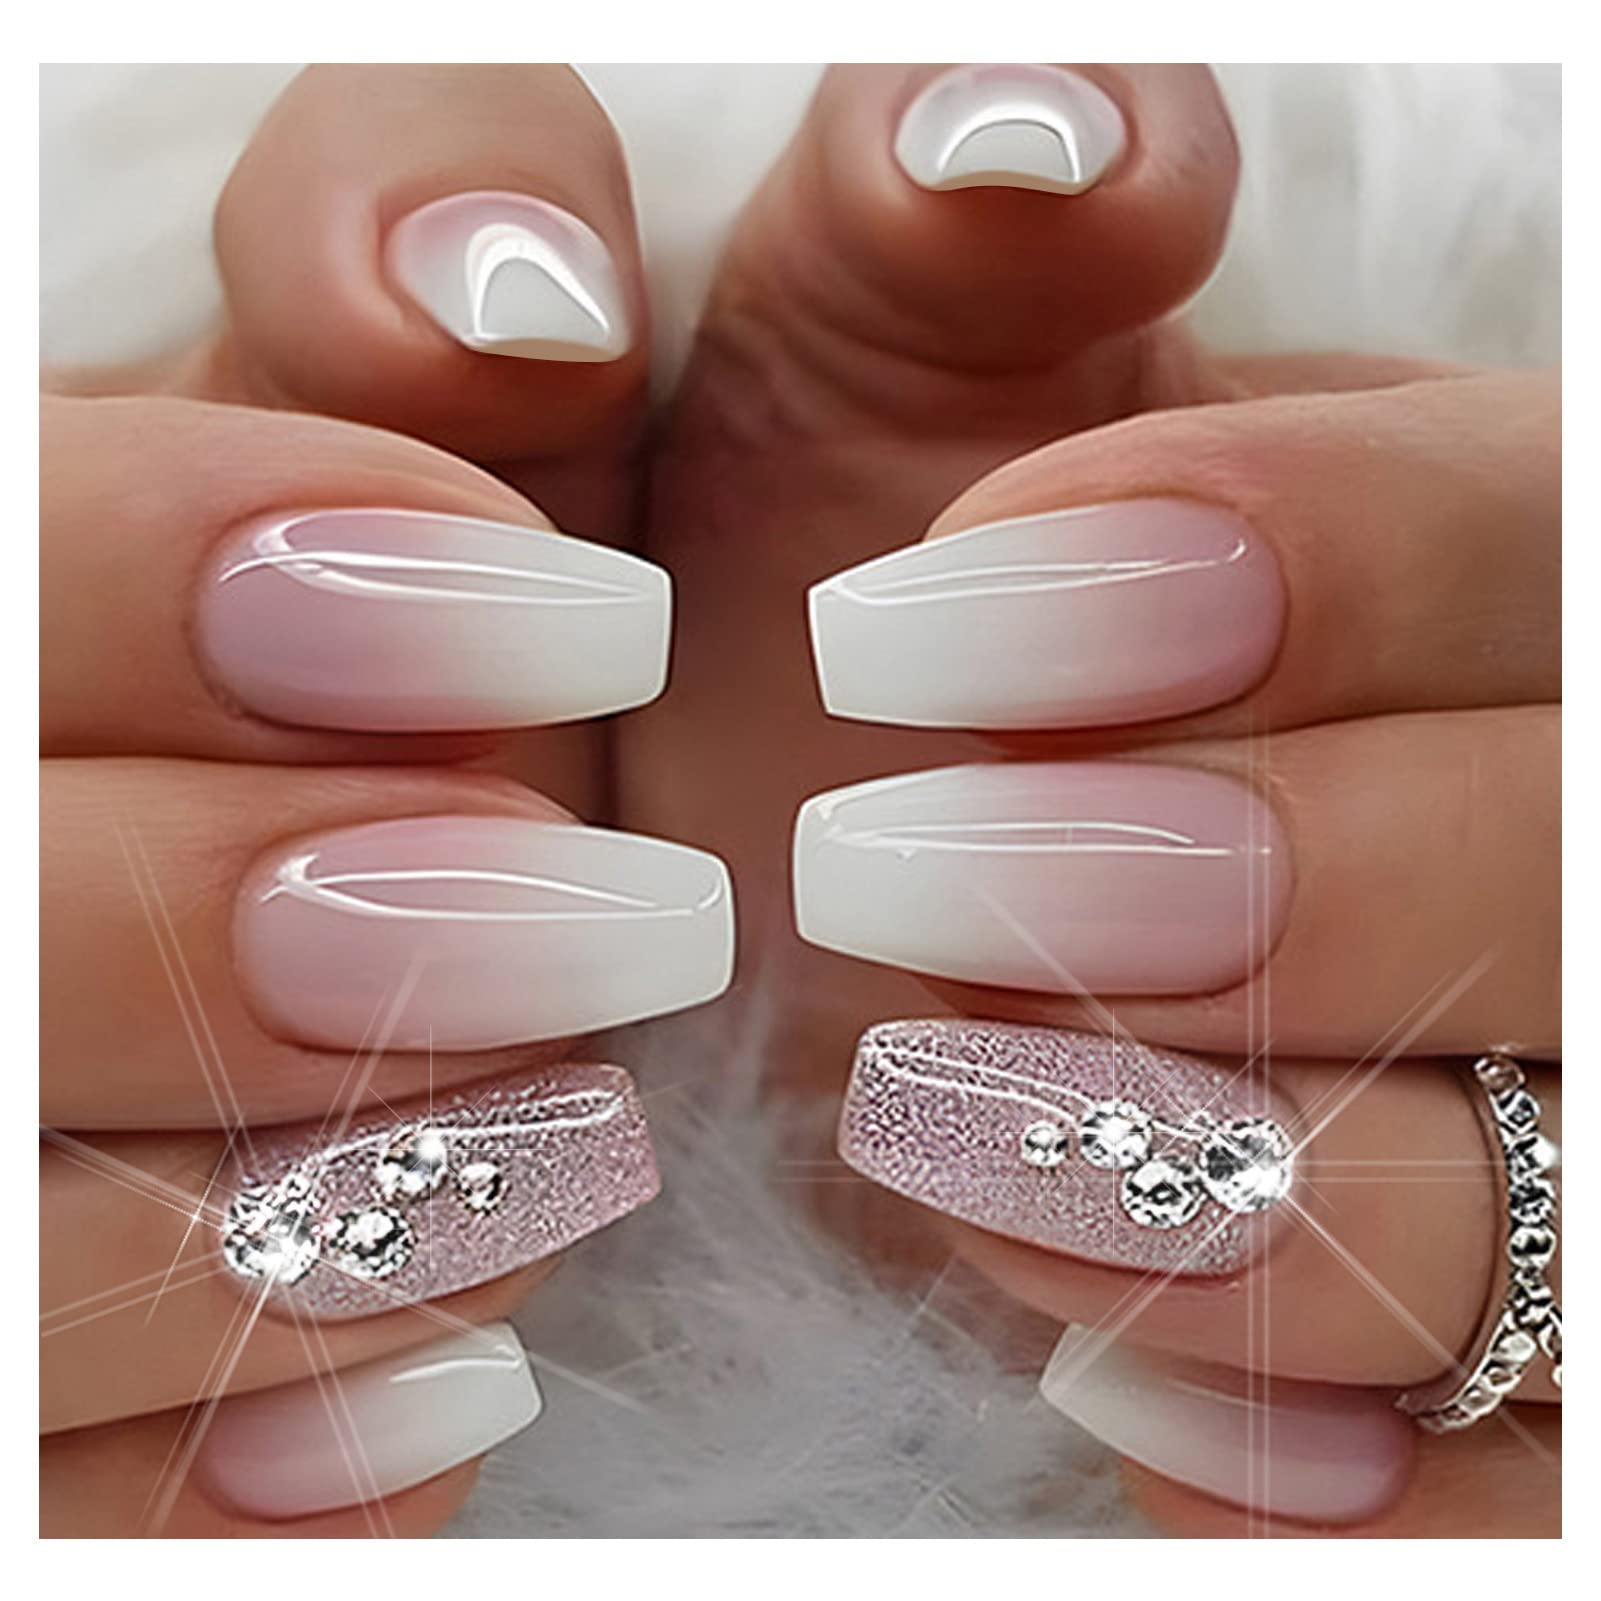 The 4 most common nail shapes (with photos) | Nail shapes, Acrylic nail  shapes, Almond nails designs